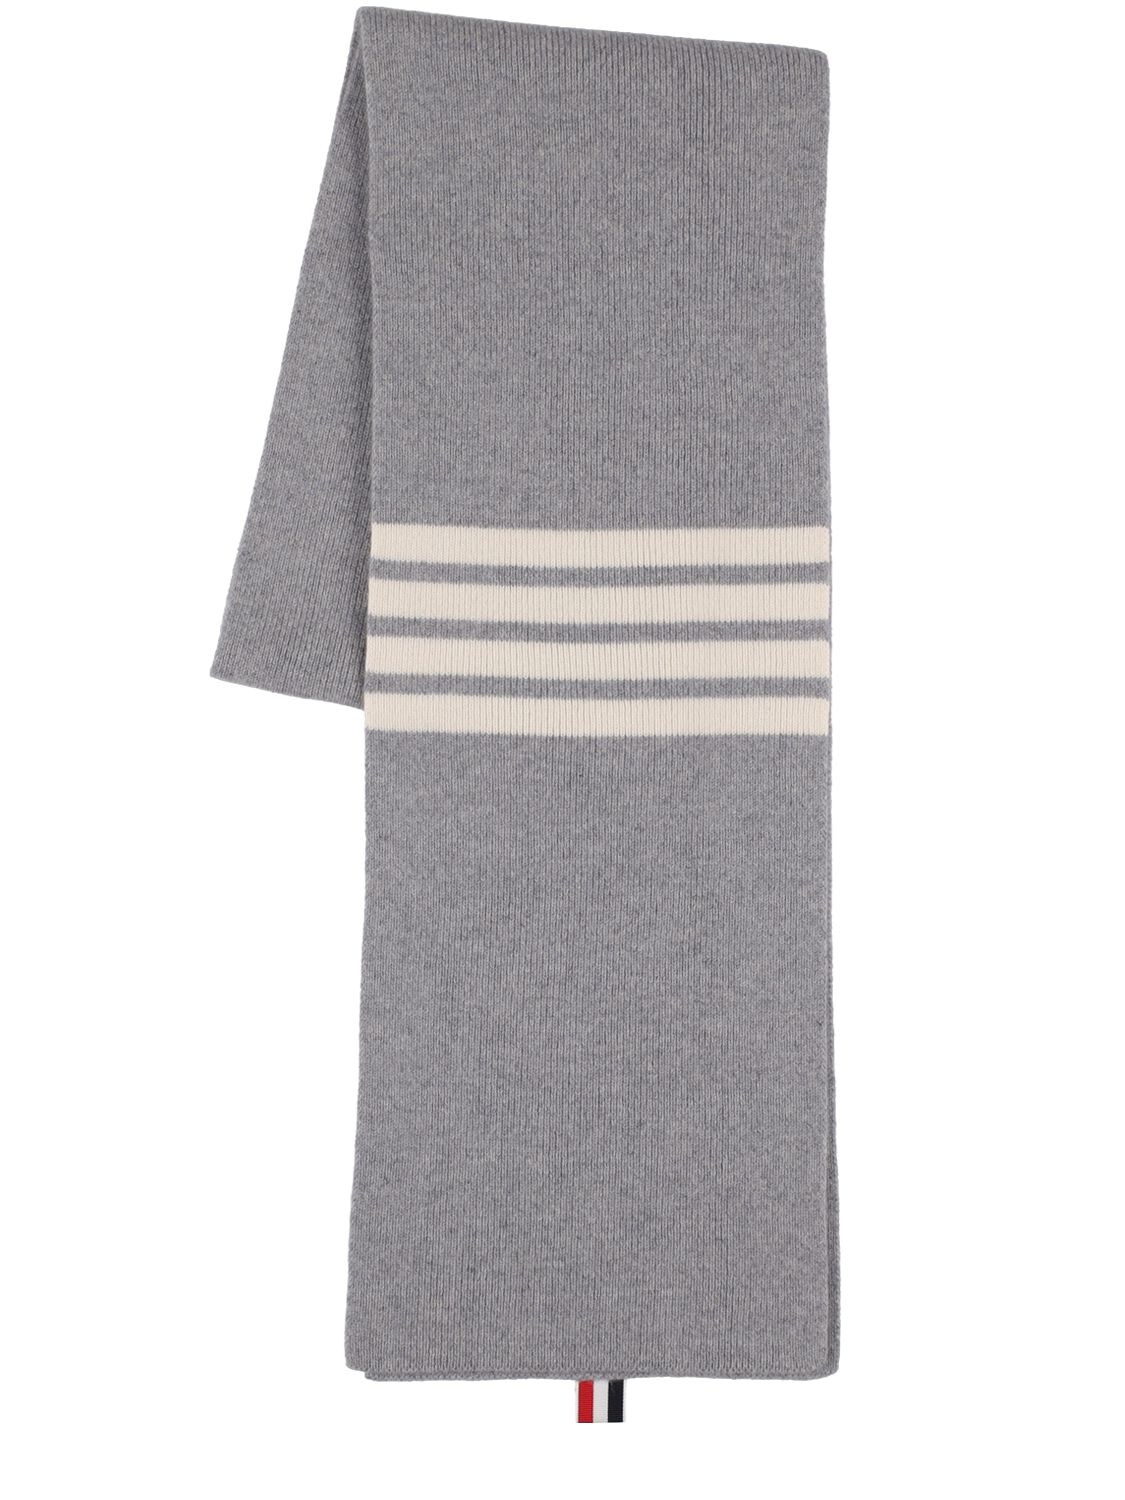 Thom Browne Rubbed Cashmere Scarf In Light Grey